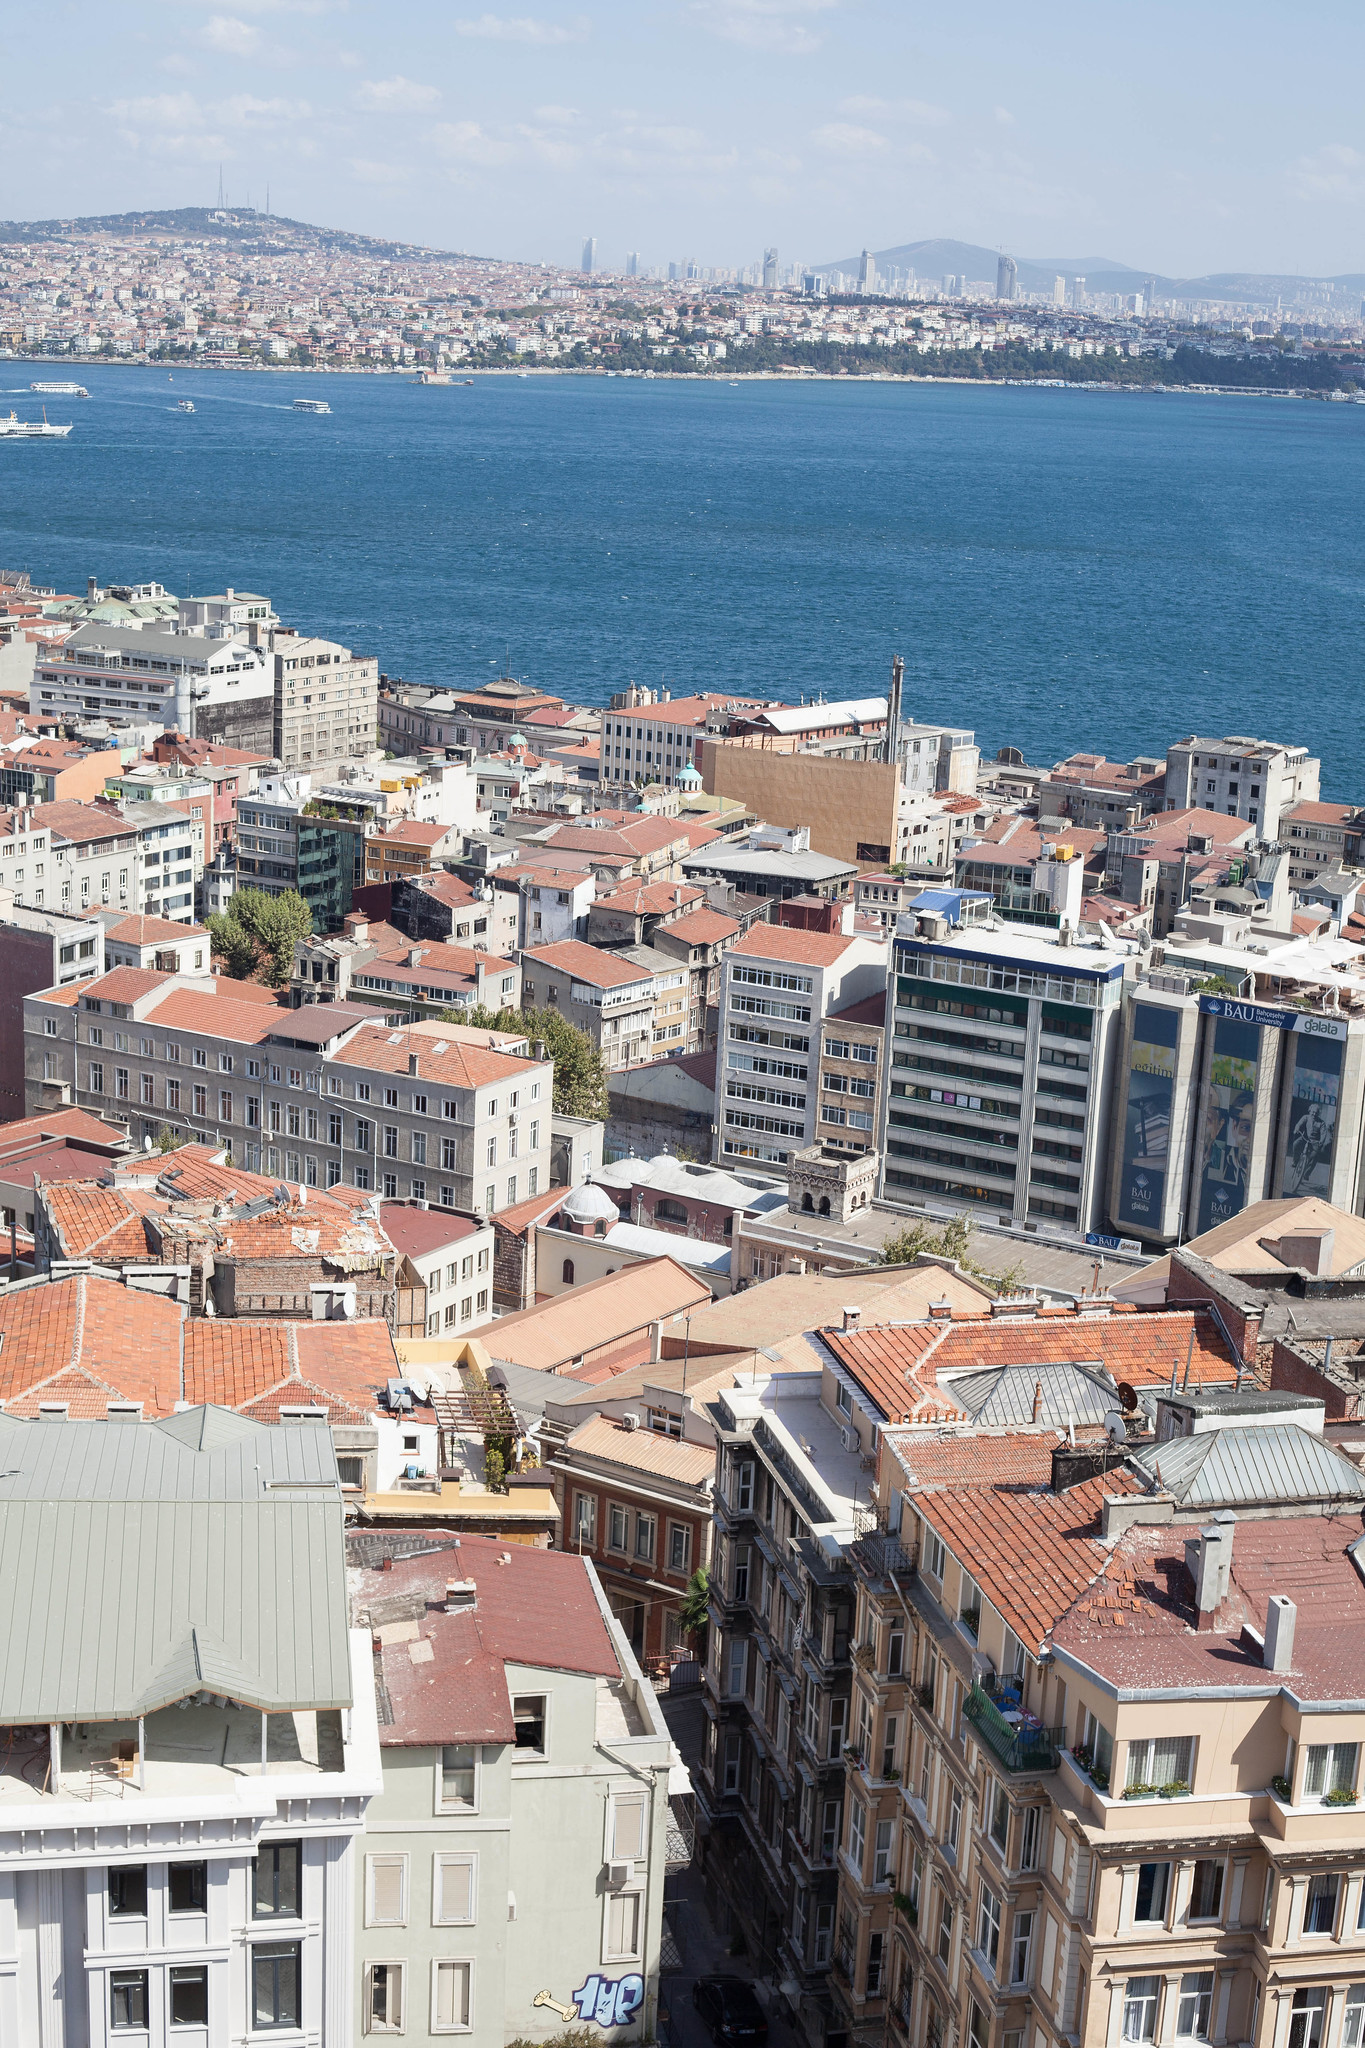 Our apartment from Galata Tower.